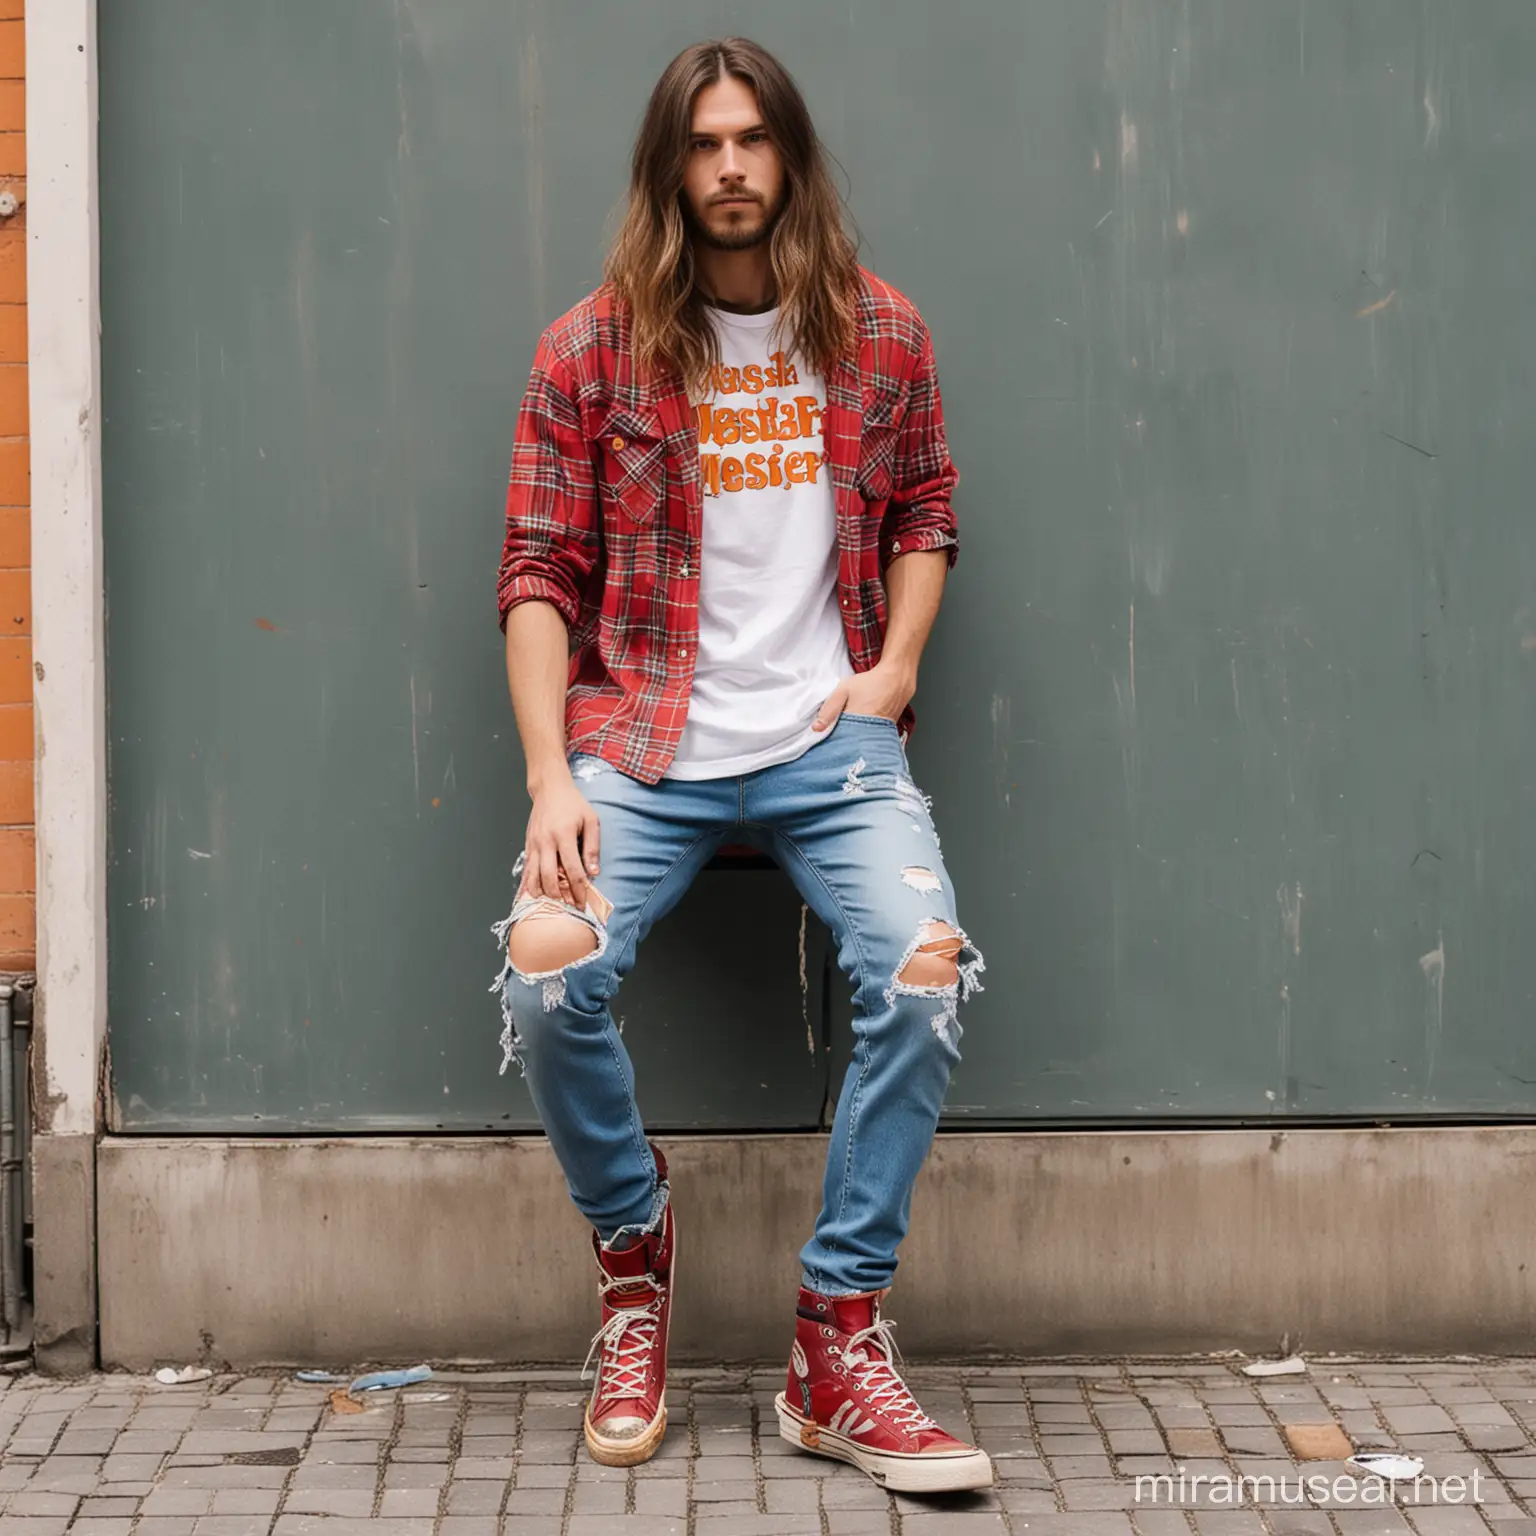 Fashionable Man in Red Plaid Shirt and Ripped Jeans against Stripe Motif Background with Asian Ornaments